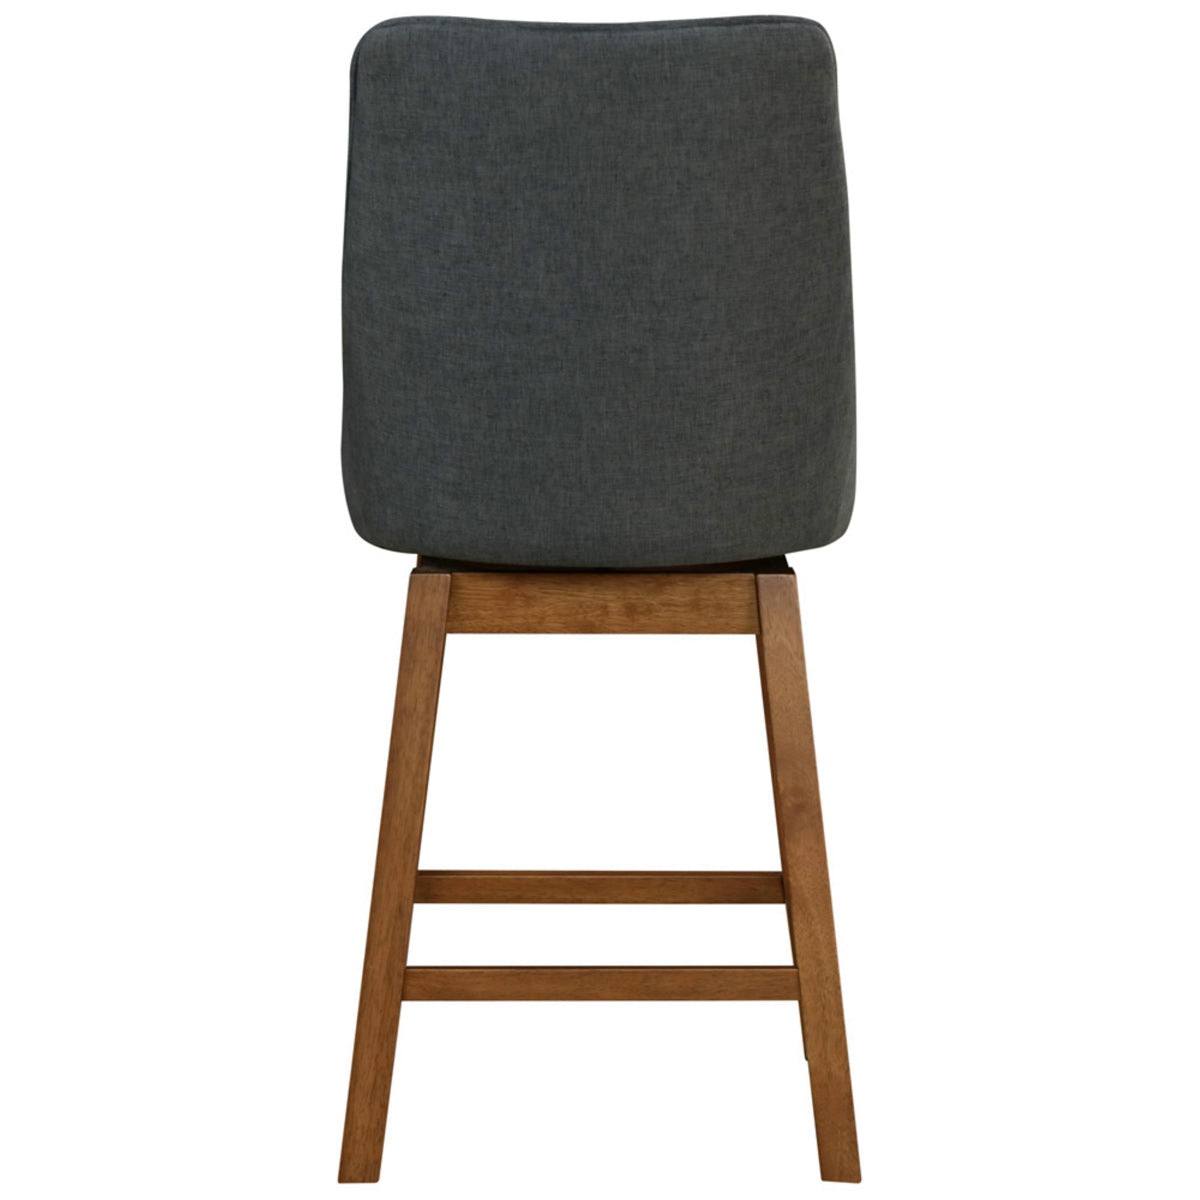 Annette Fabric Swivel Bar Stool - Set of 2 by New Pacific Direct - 1310005-384